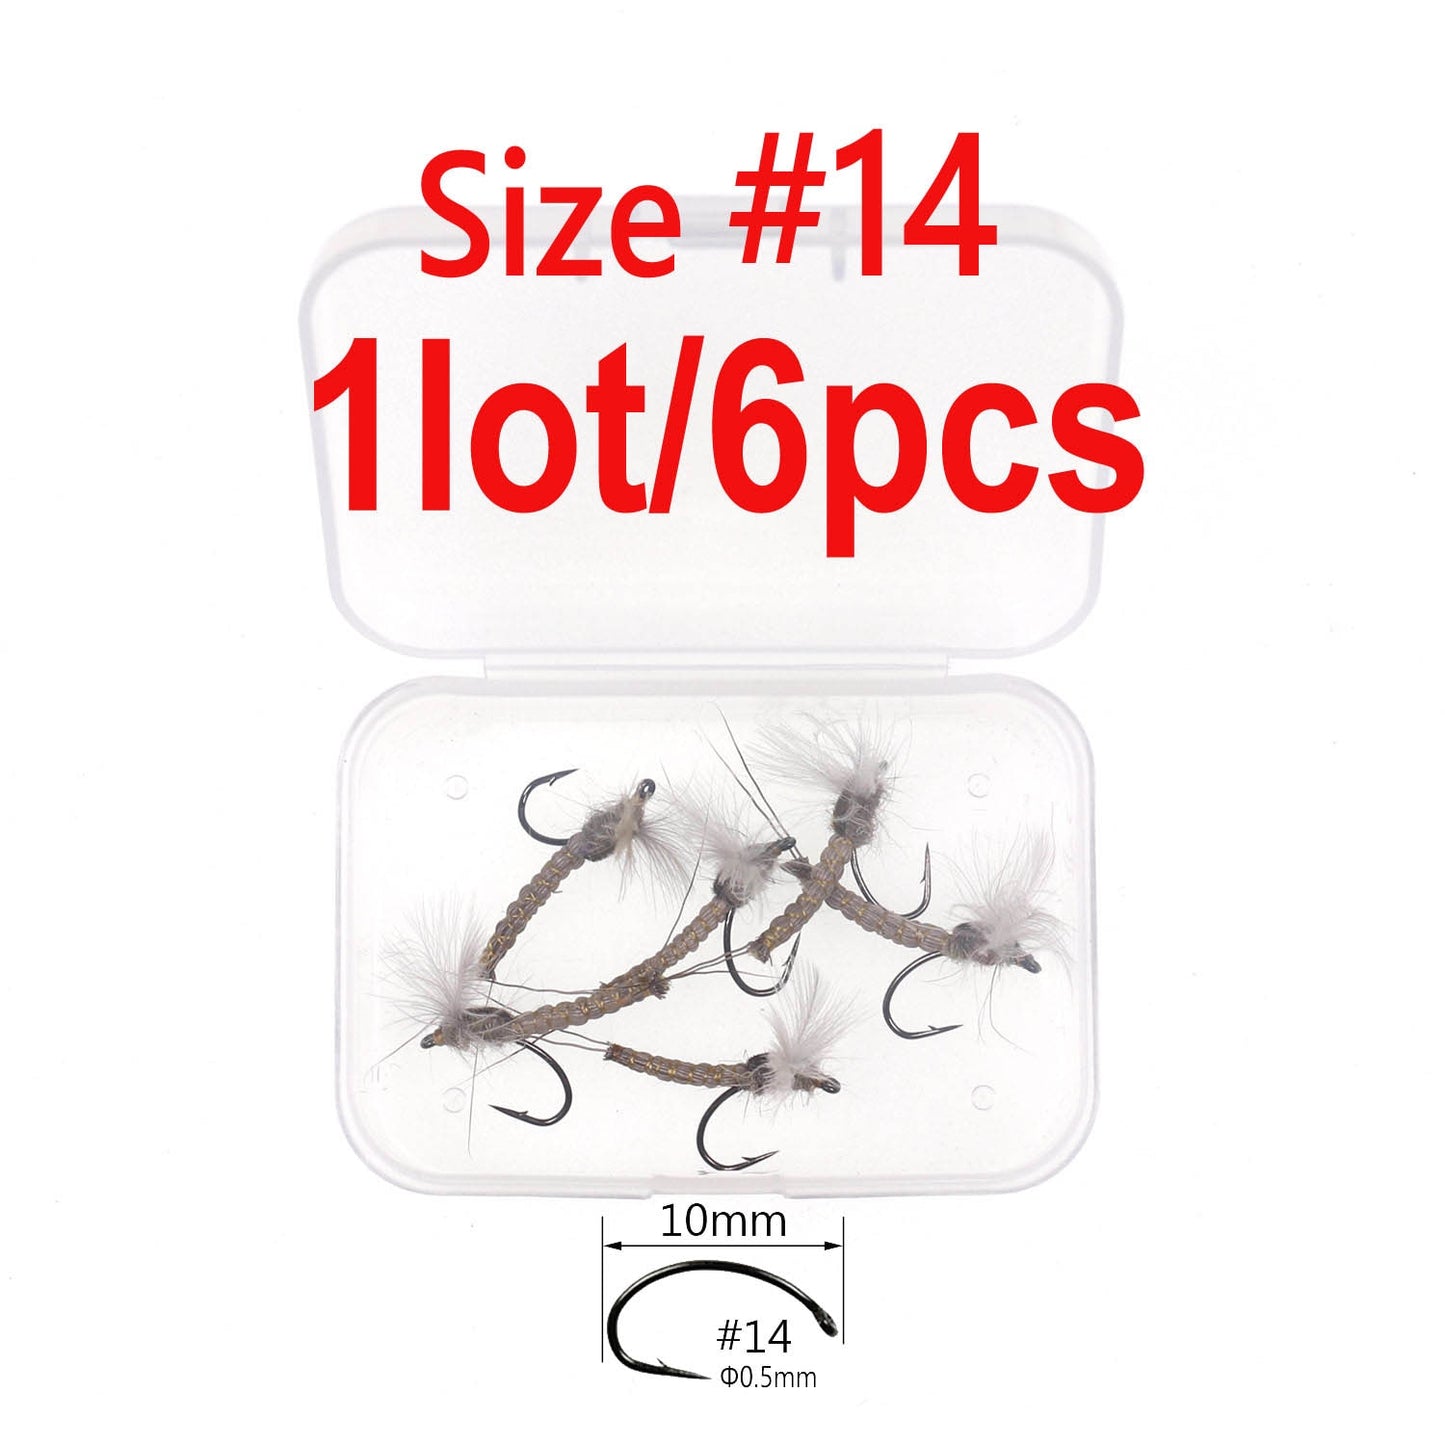 Bimoo 6PCS Size #12 CDC Feather Wing Mayfly Dry Fly Rocky River Trout Fishing Flies Bait Lure